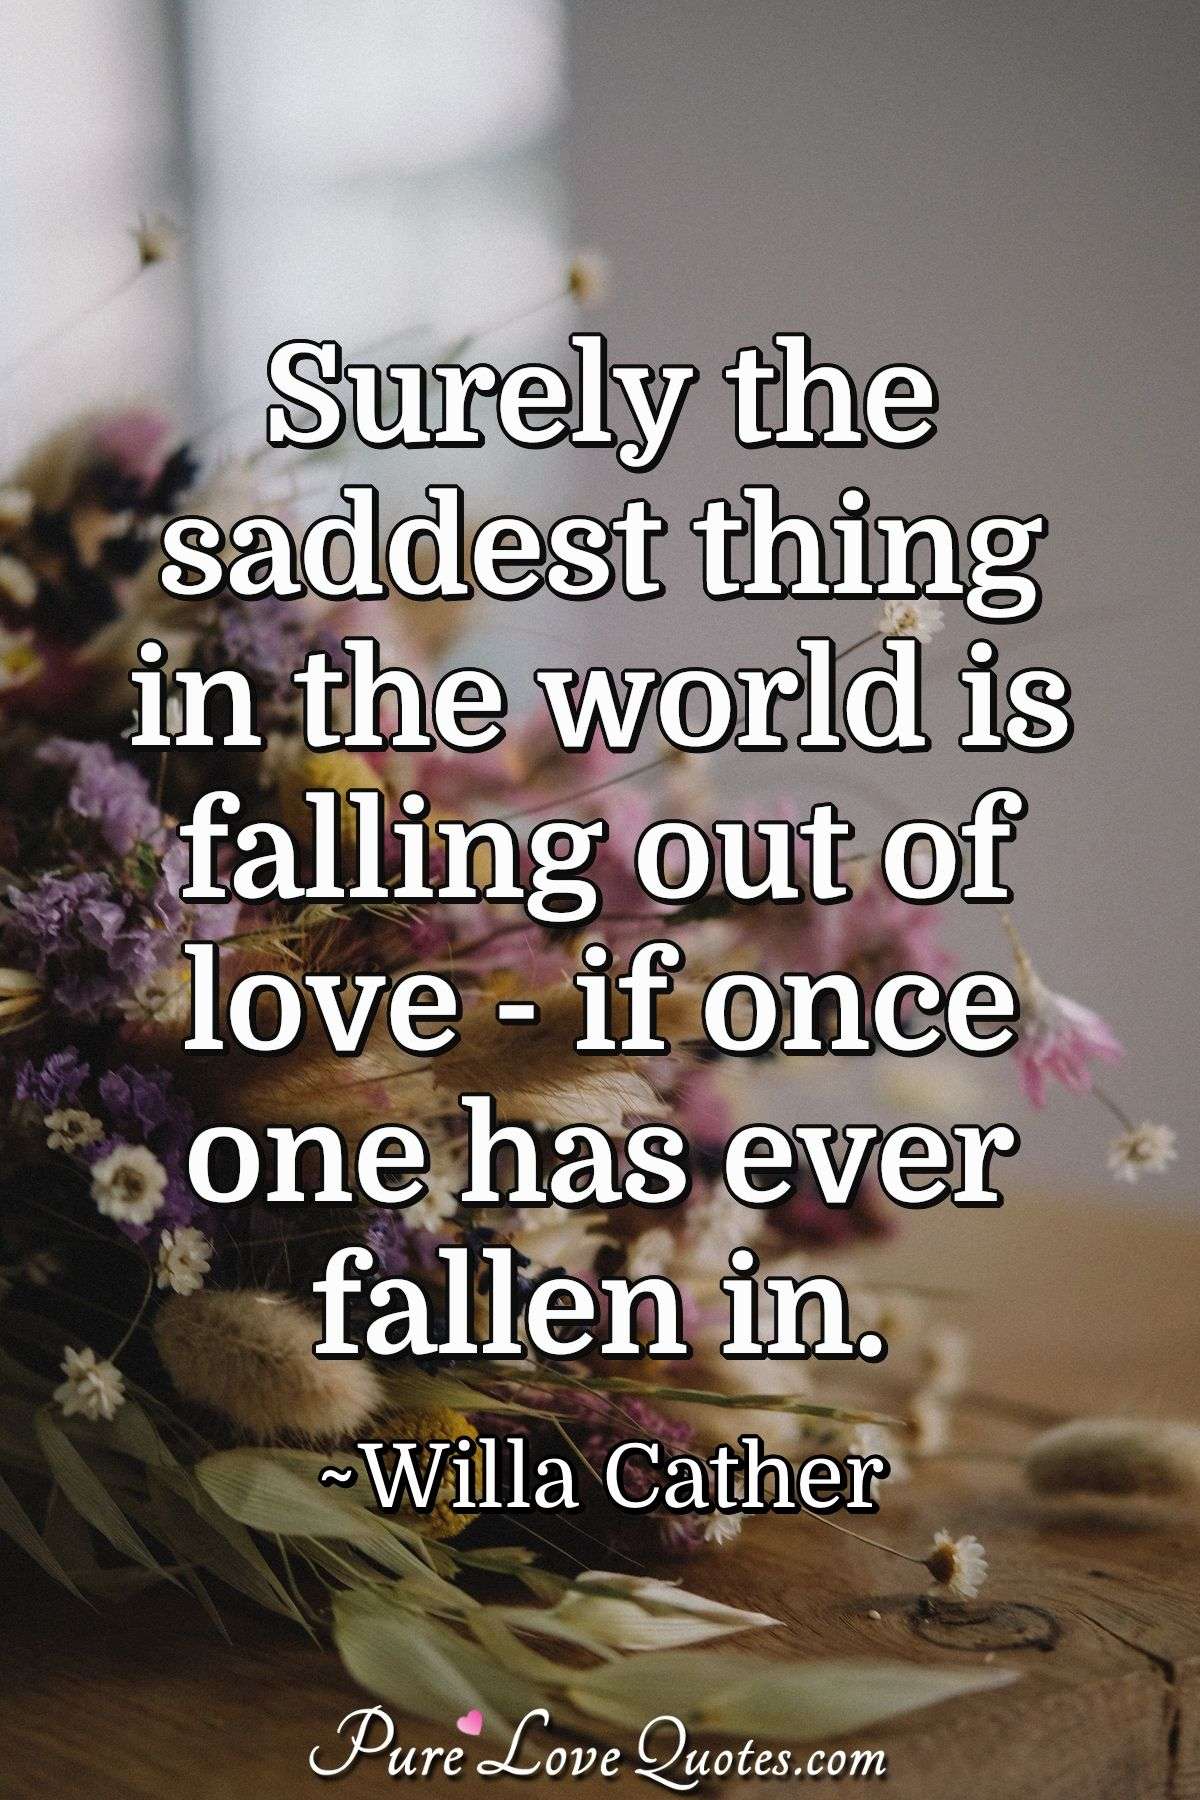 Surely the saddest thing in the world is falling out of love -  if once one has ever fallen in. - Willa Cather